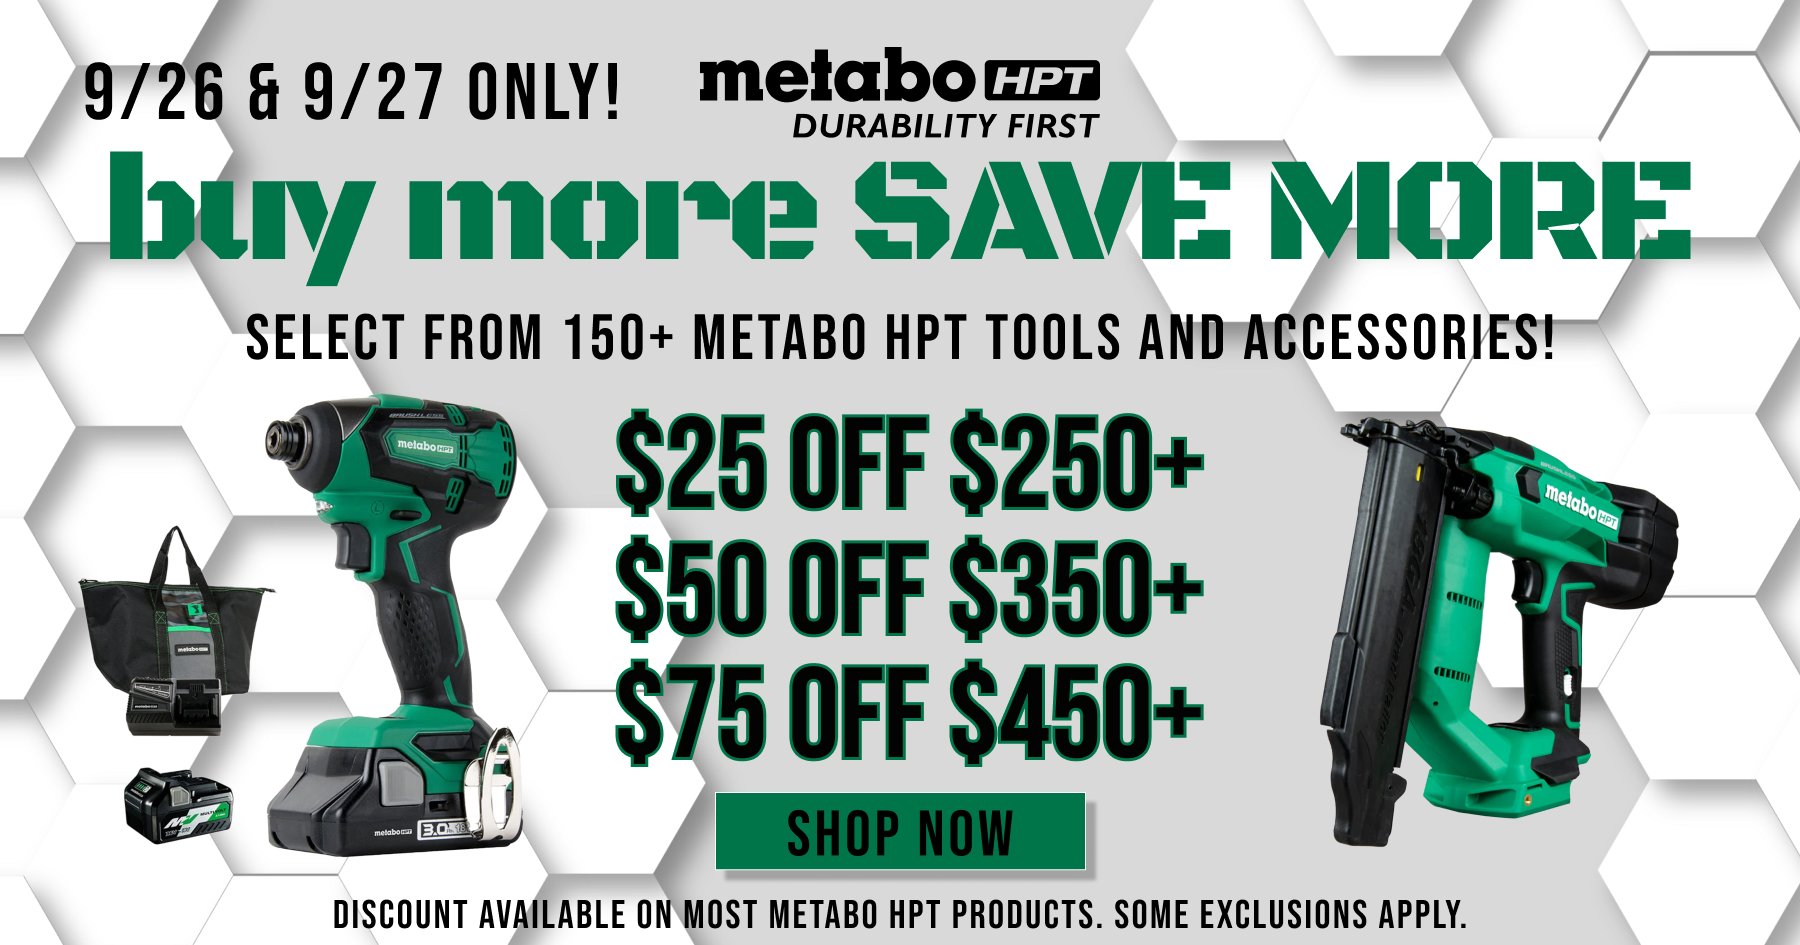 Metabo HPT // Buy More, Save More // 9/26 & 9/27 ONLY // $25 Off $250+, $50 Off $350+, $75 Off $450+ // Select from 150+ of Metabo HPT Tools and Accessories! // Discount Available on Most Metabo HPT Products. Some Exclusions Apply. // SHOP NOW